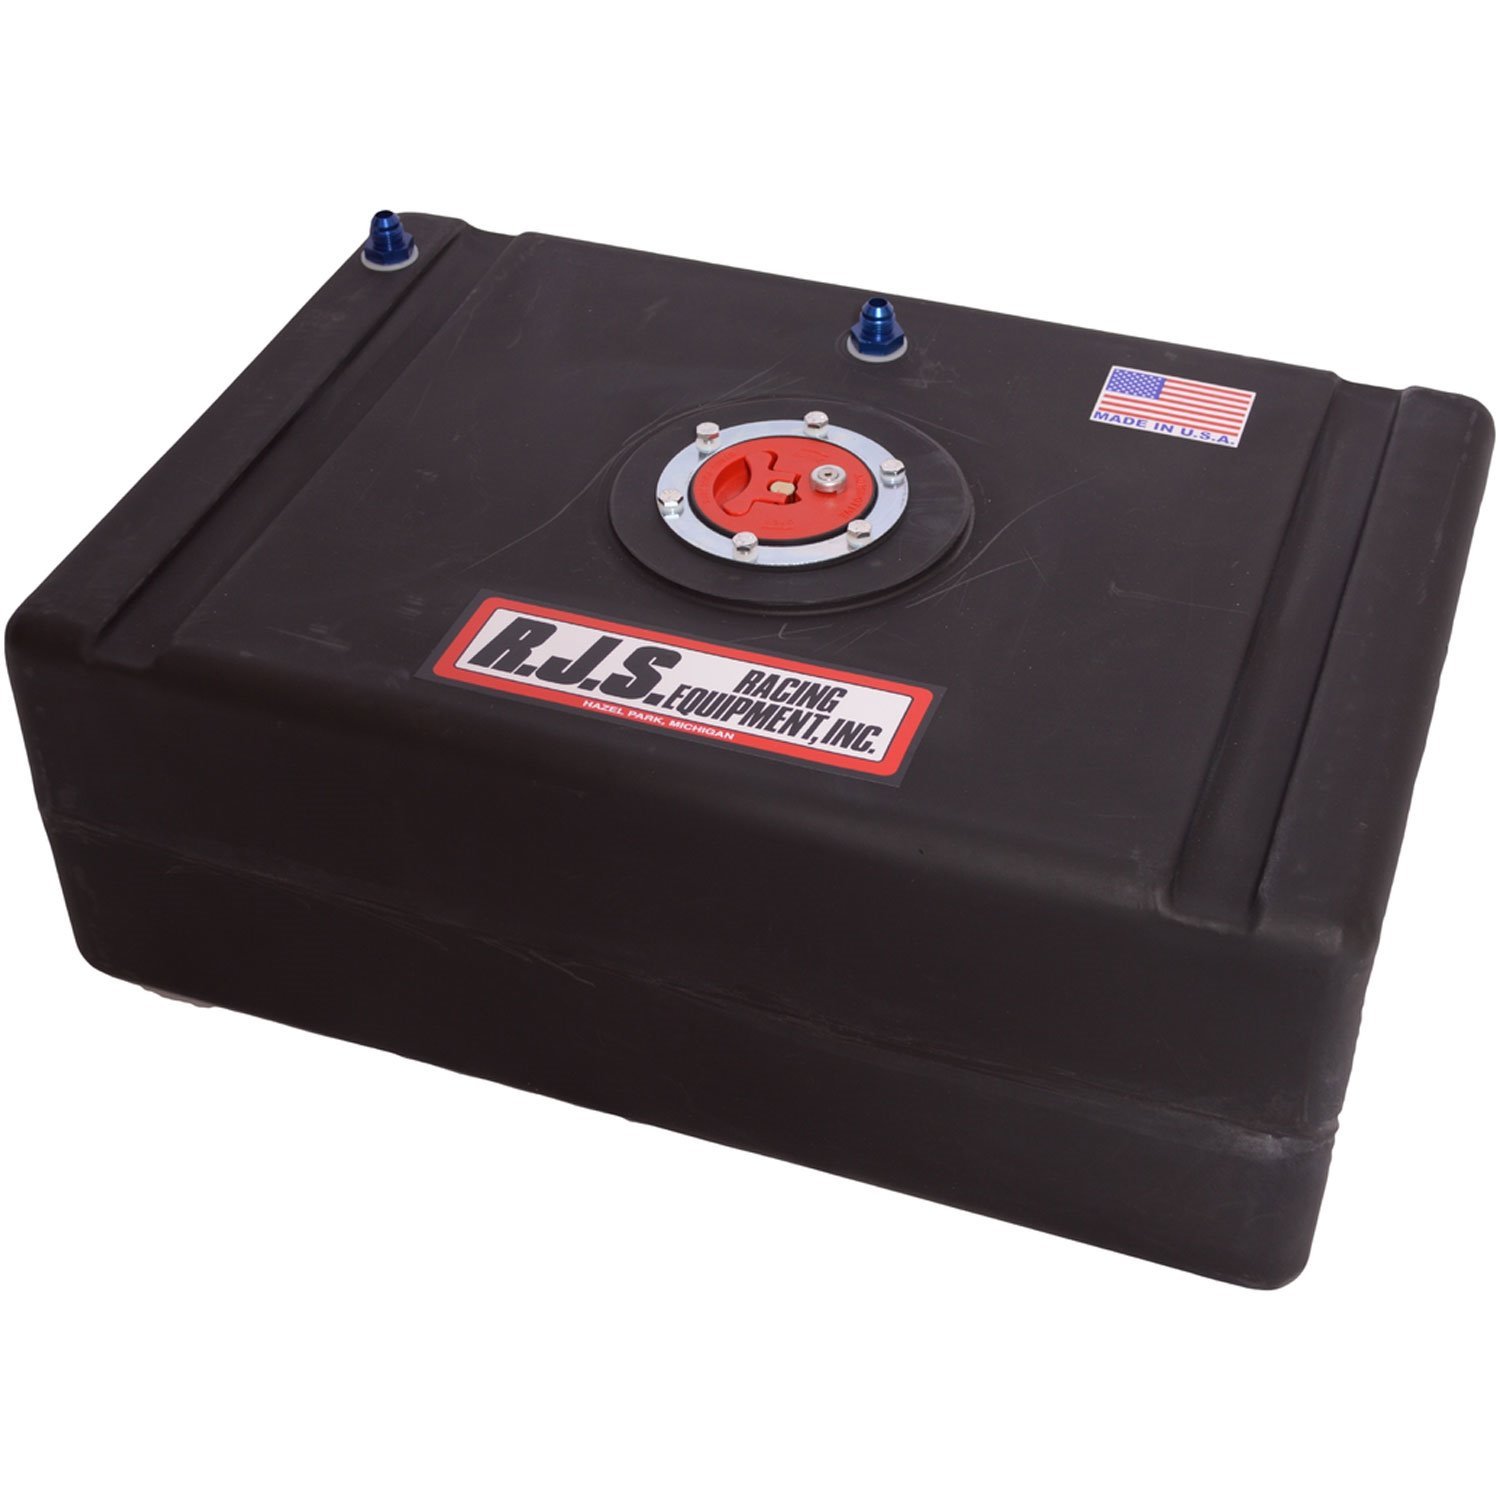 15 Gallon Economy Fuel Cell with Raised Plastic Filler Cap and Red Can